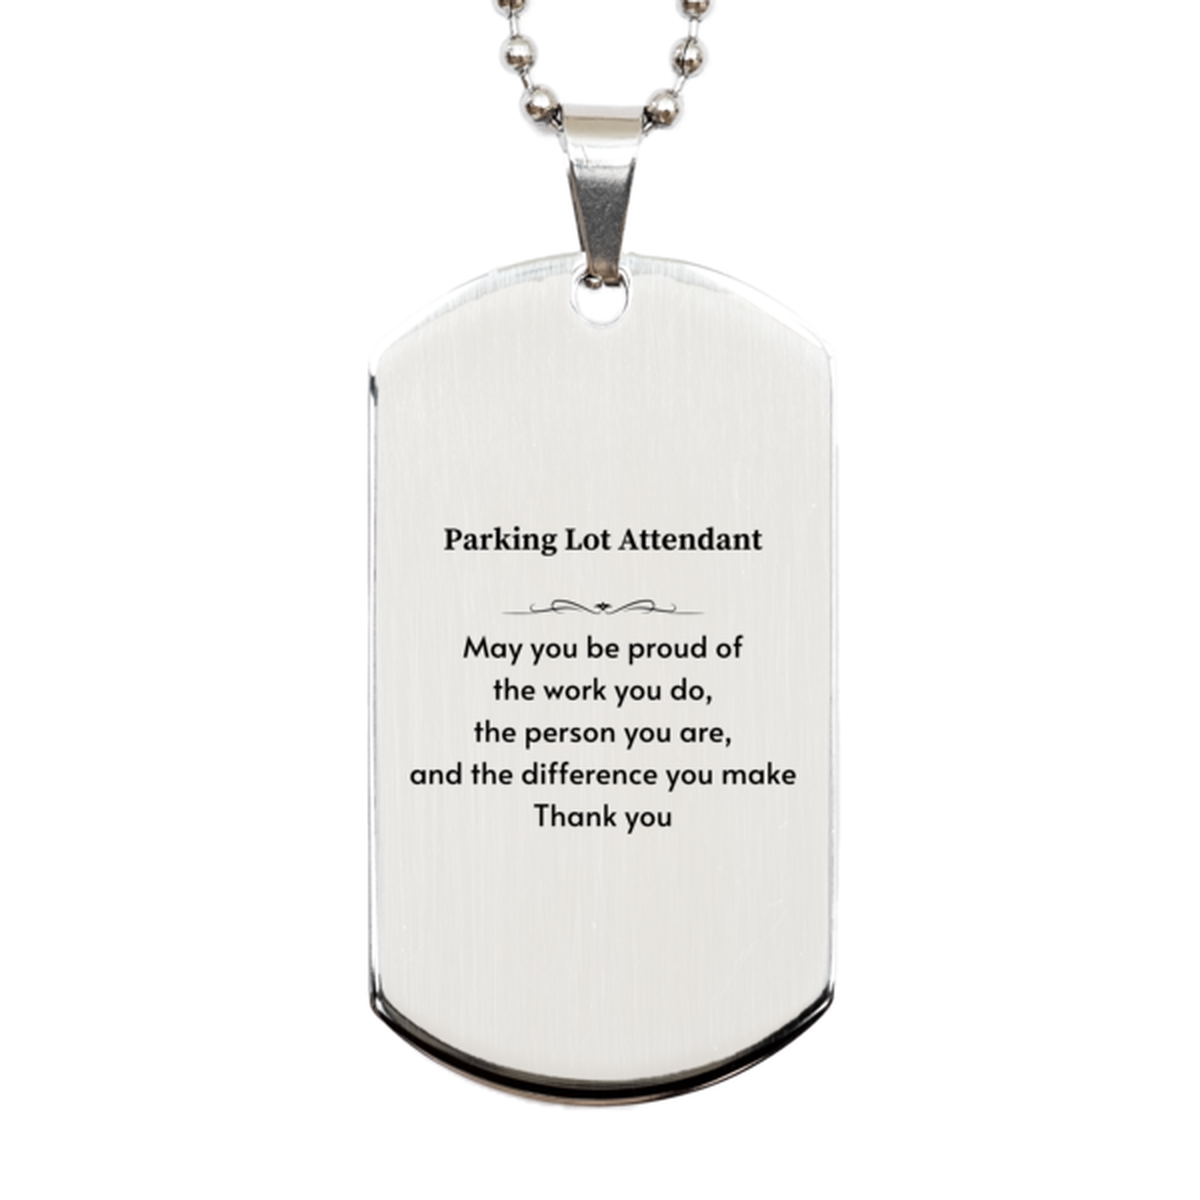 Heartwarming Silver Dog Tag Retirement Coworkers Gifts for Parking Lot Attendant, Parking Lot Attendant May You be proud of the work you do, the person you are Gifts for Boss Men Women Friends